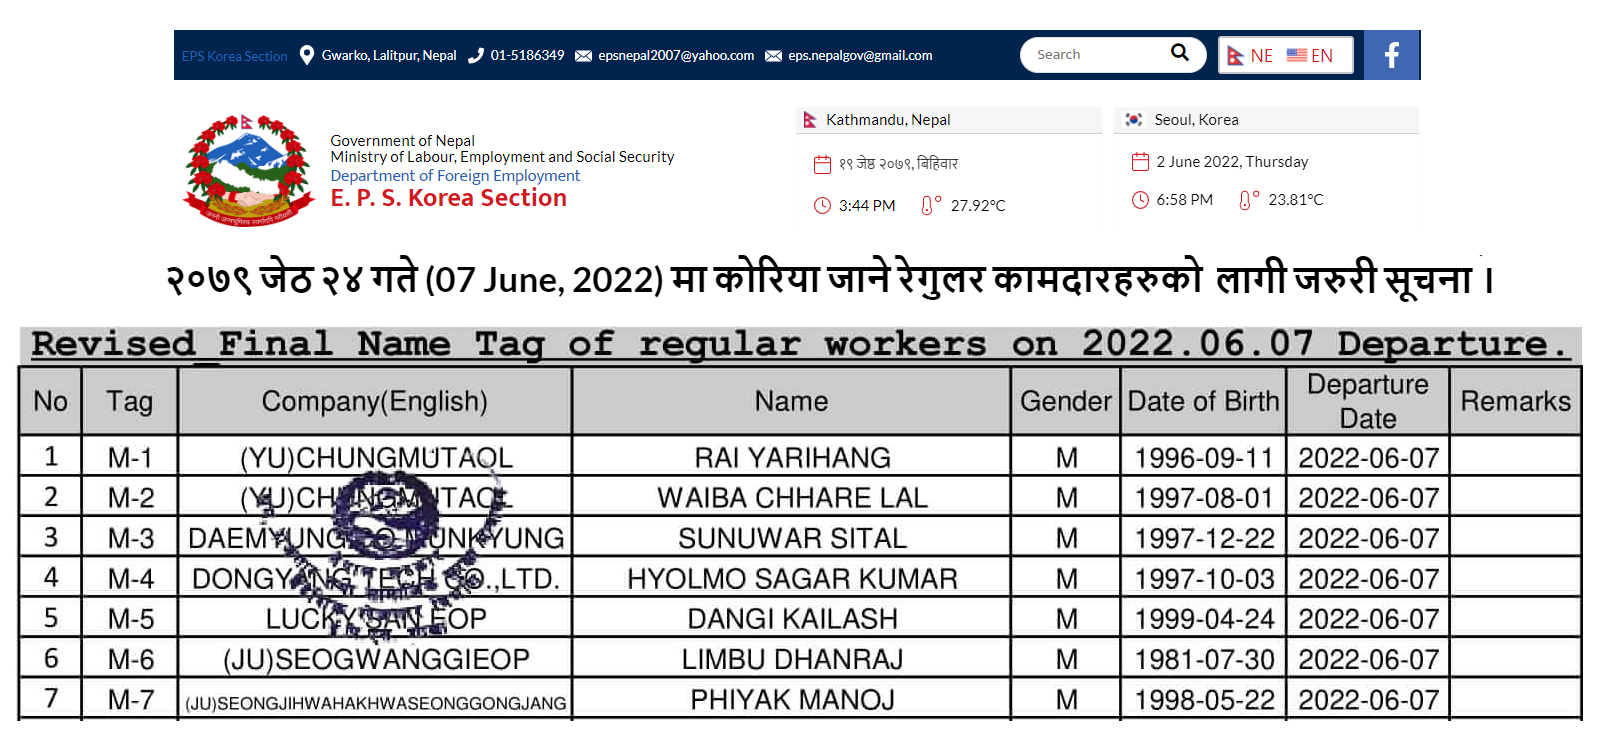 Revised Final Name Lists of RW on 07 June 2022